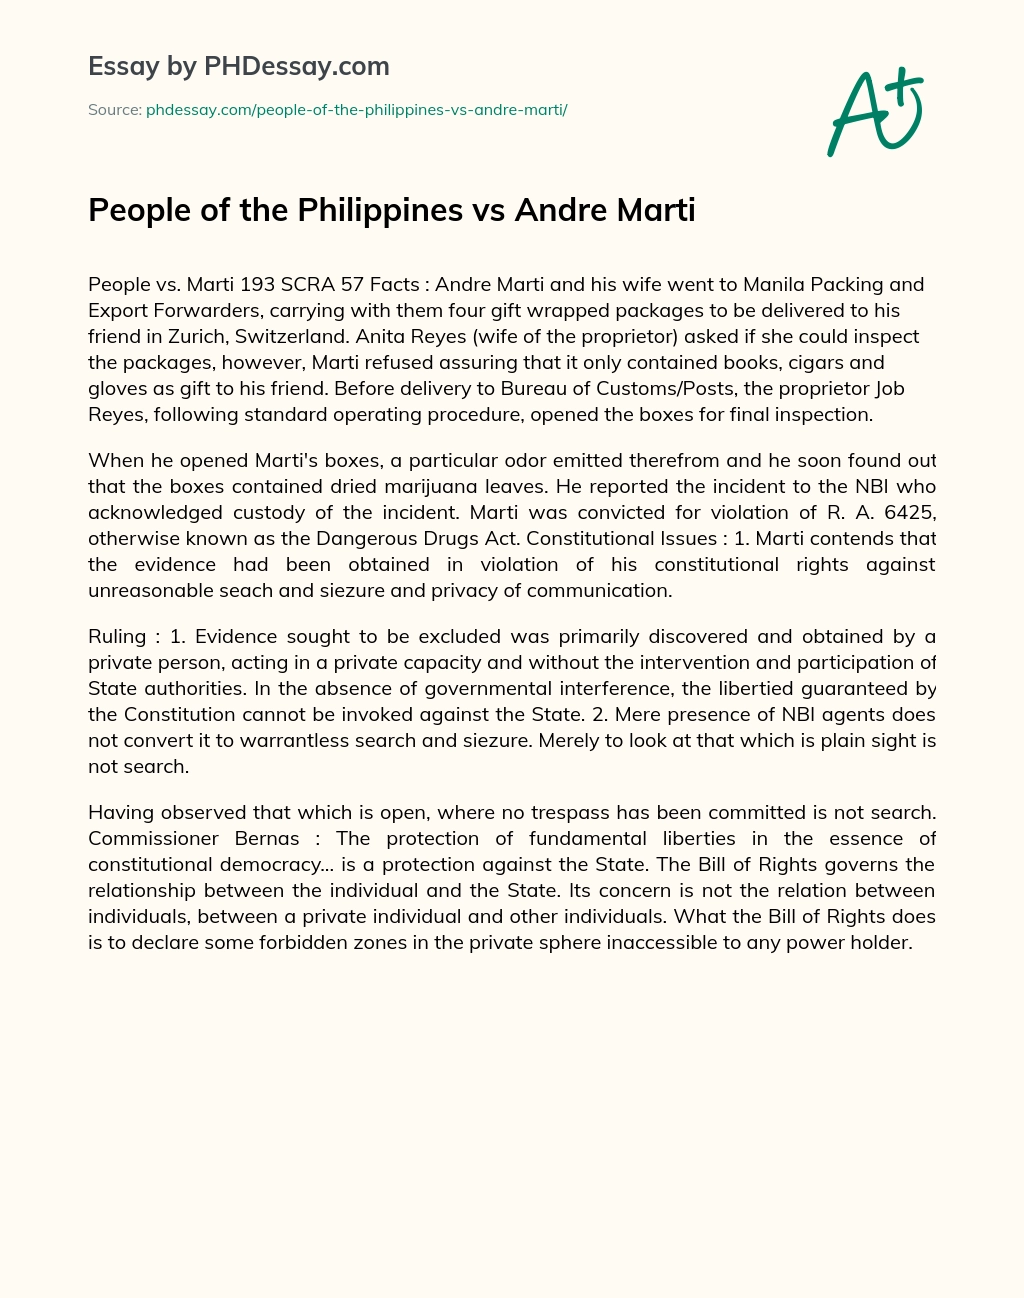 People of the Philippines vs Andre Marti essay